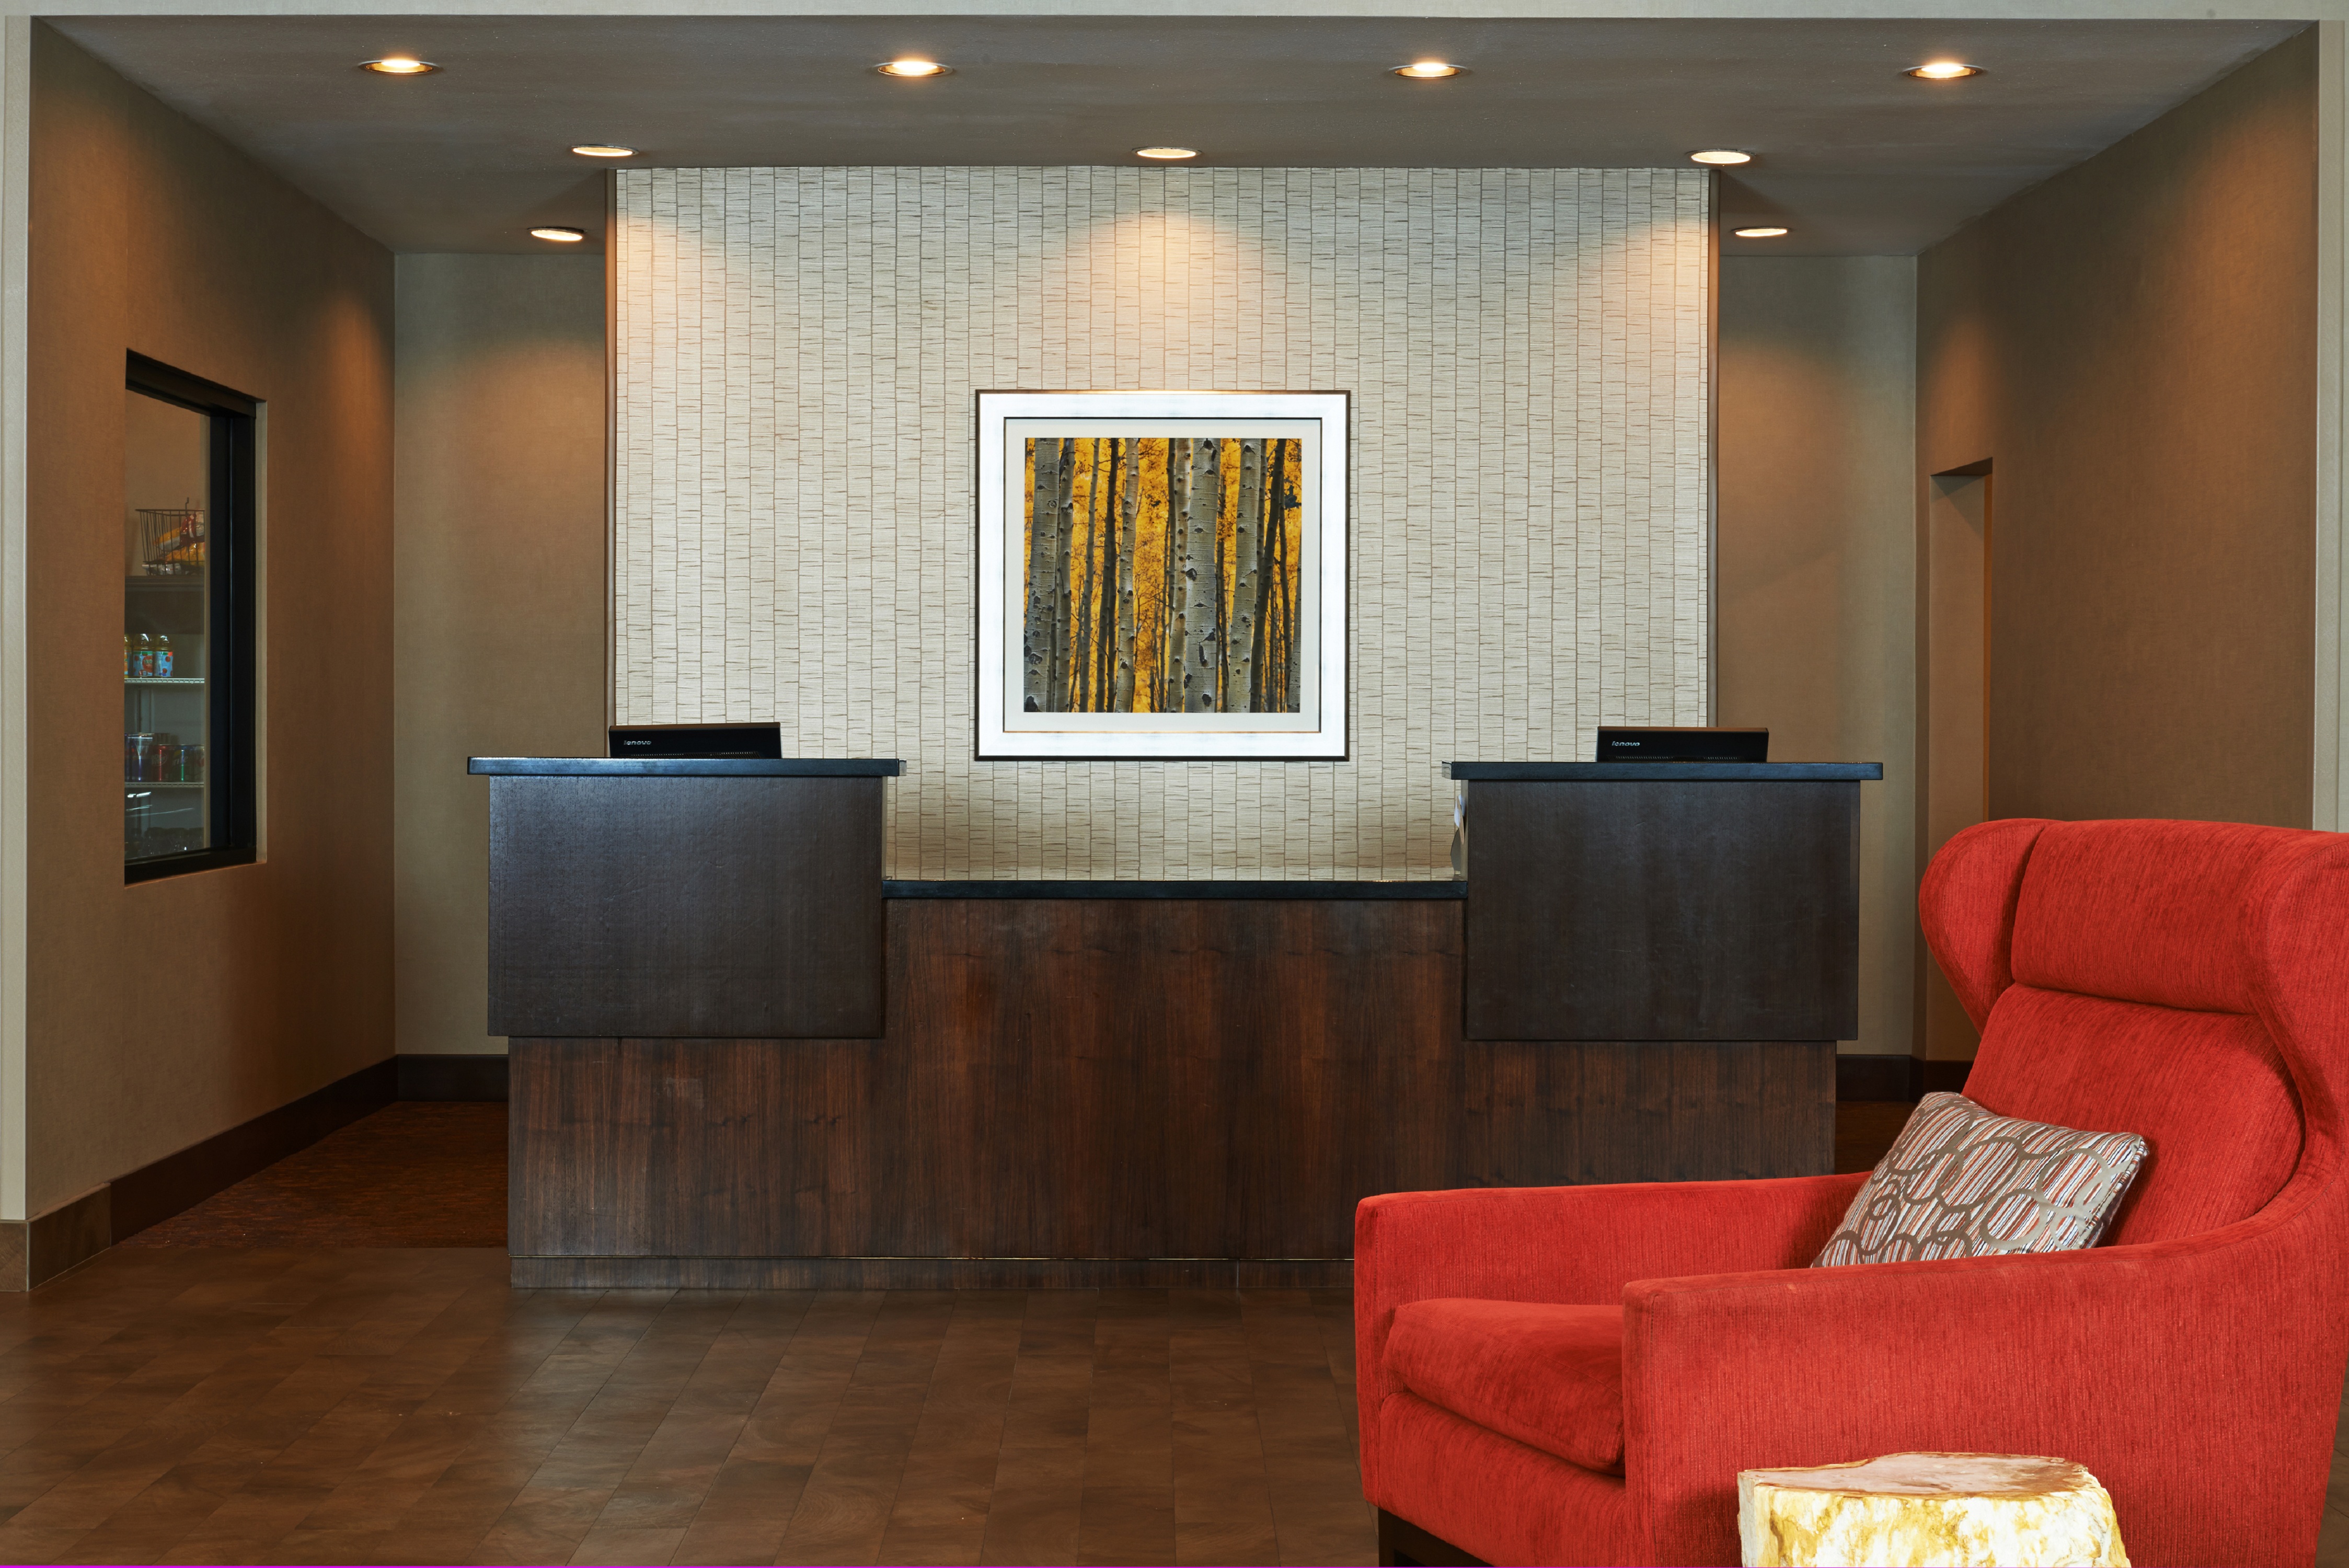 Reception Area With Red Armchair in Sitting Area and Wall Art Behind Front Desk With Two Computers